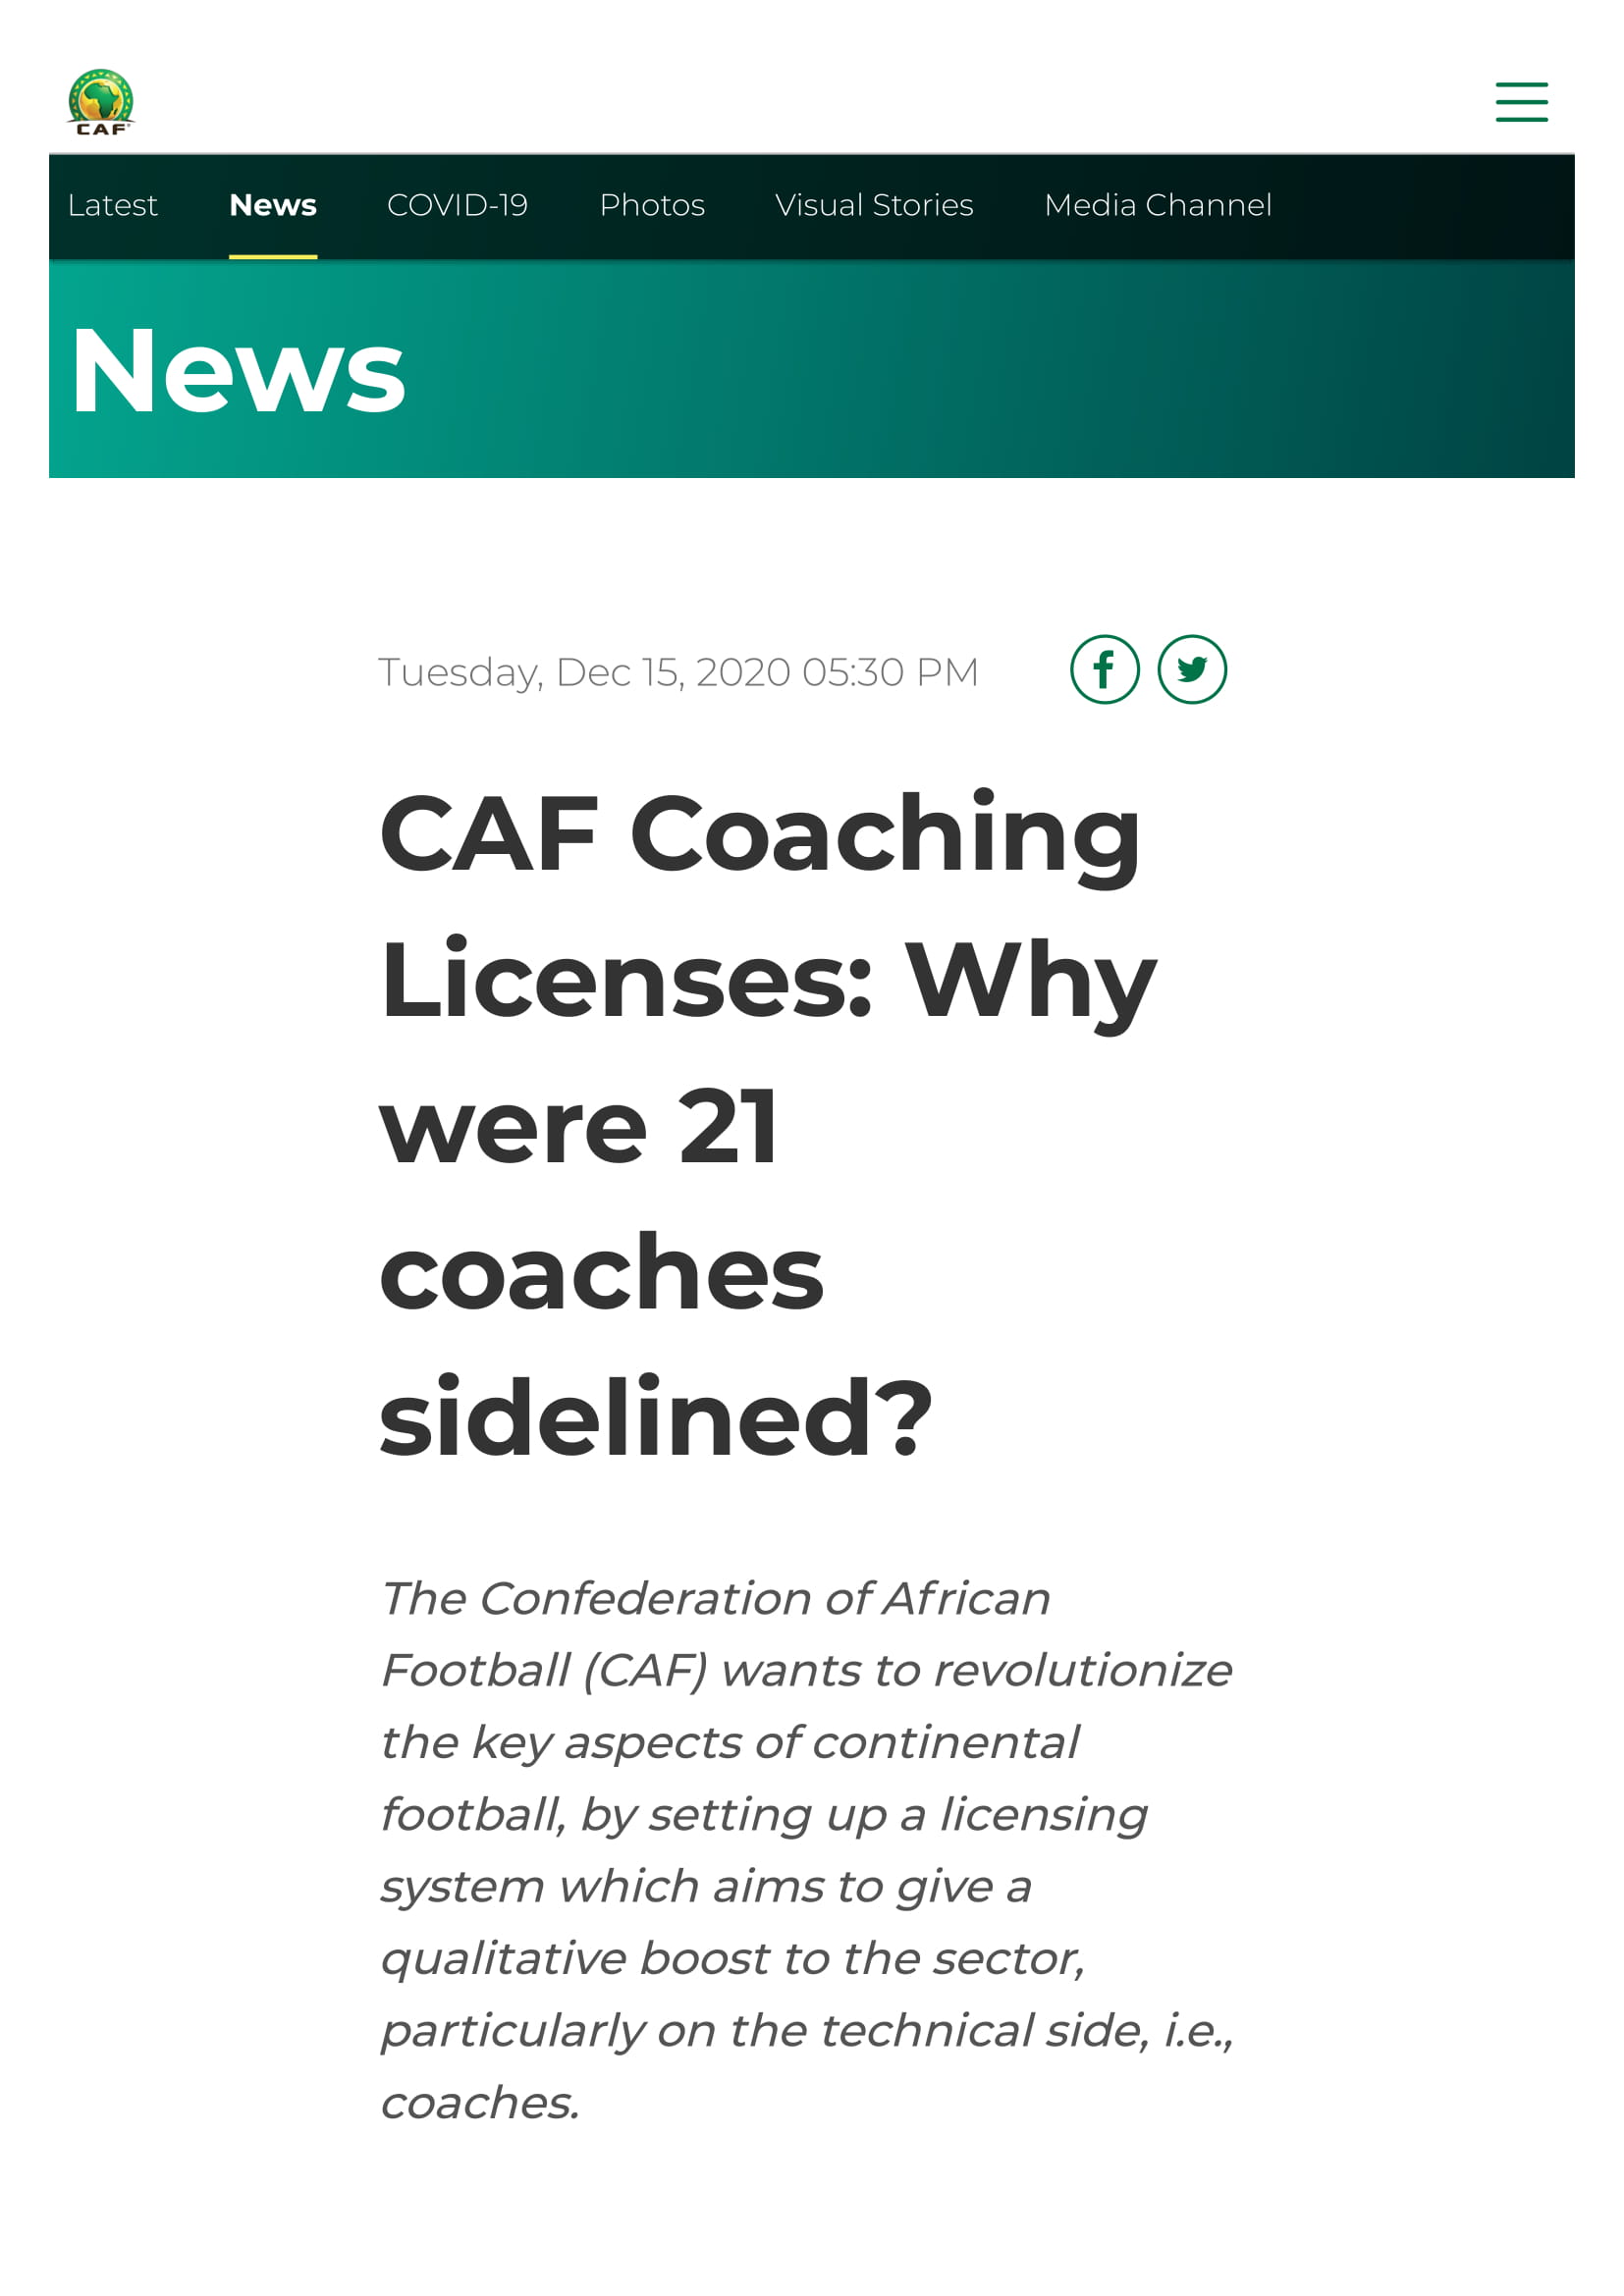 CAF COACHING LICENSE: WHY WERE 21 COACHES SIDELINED?